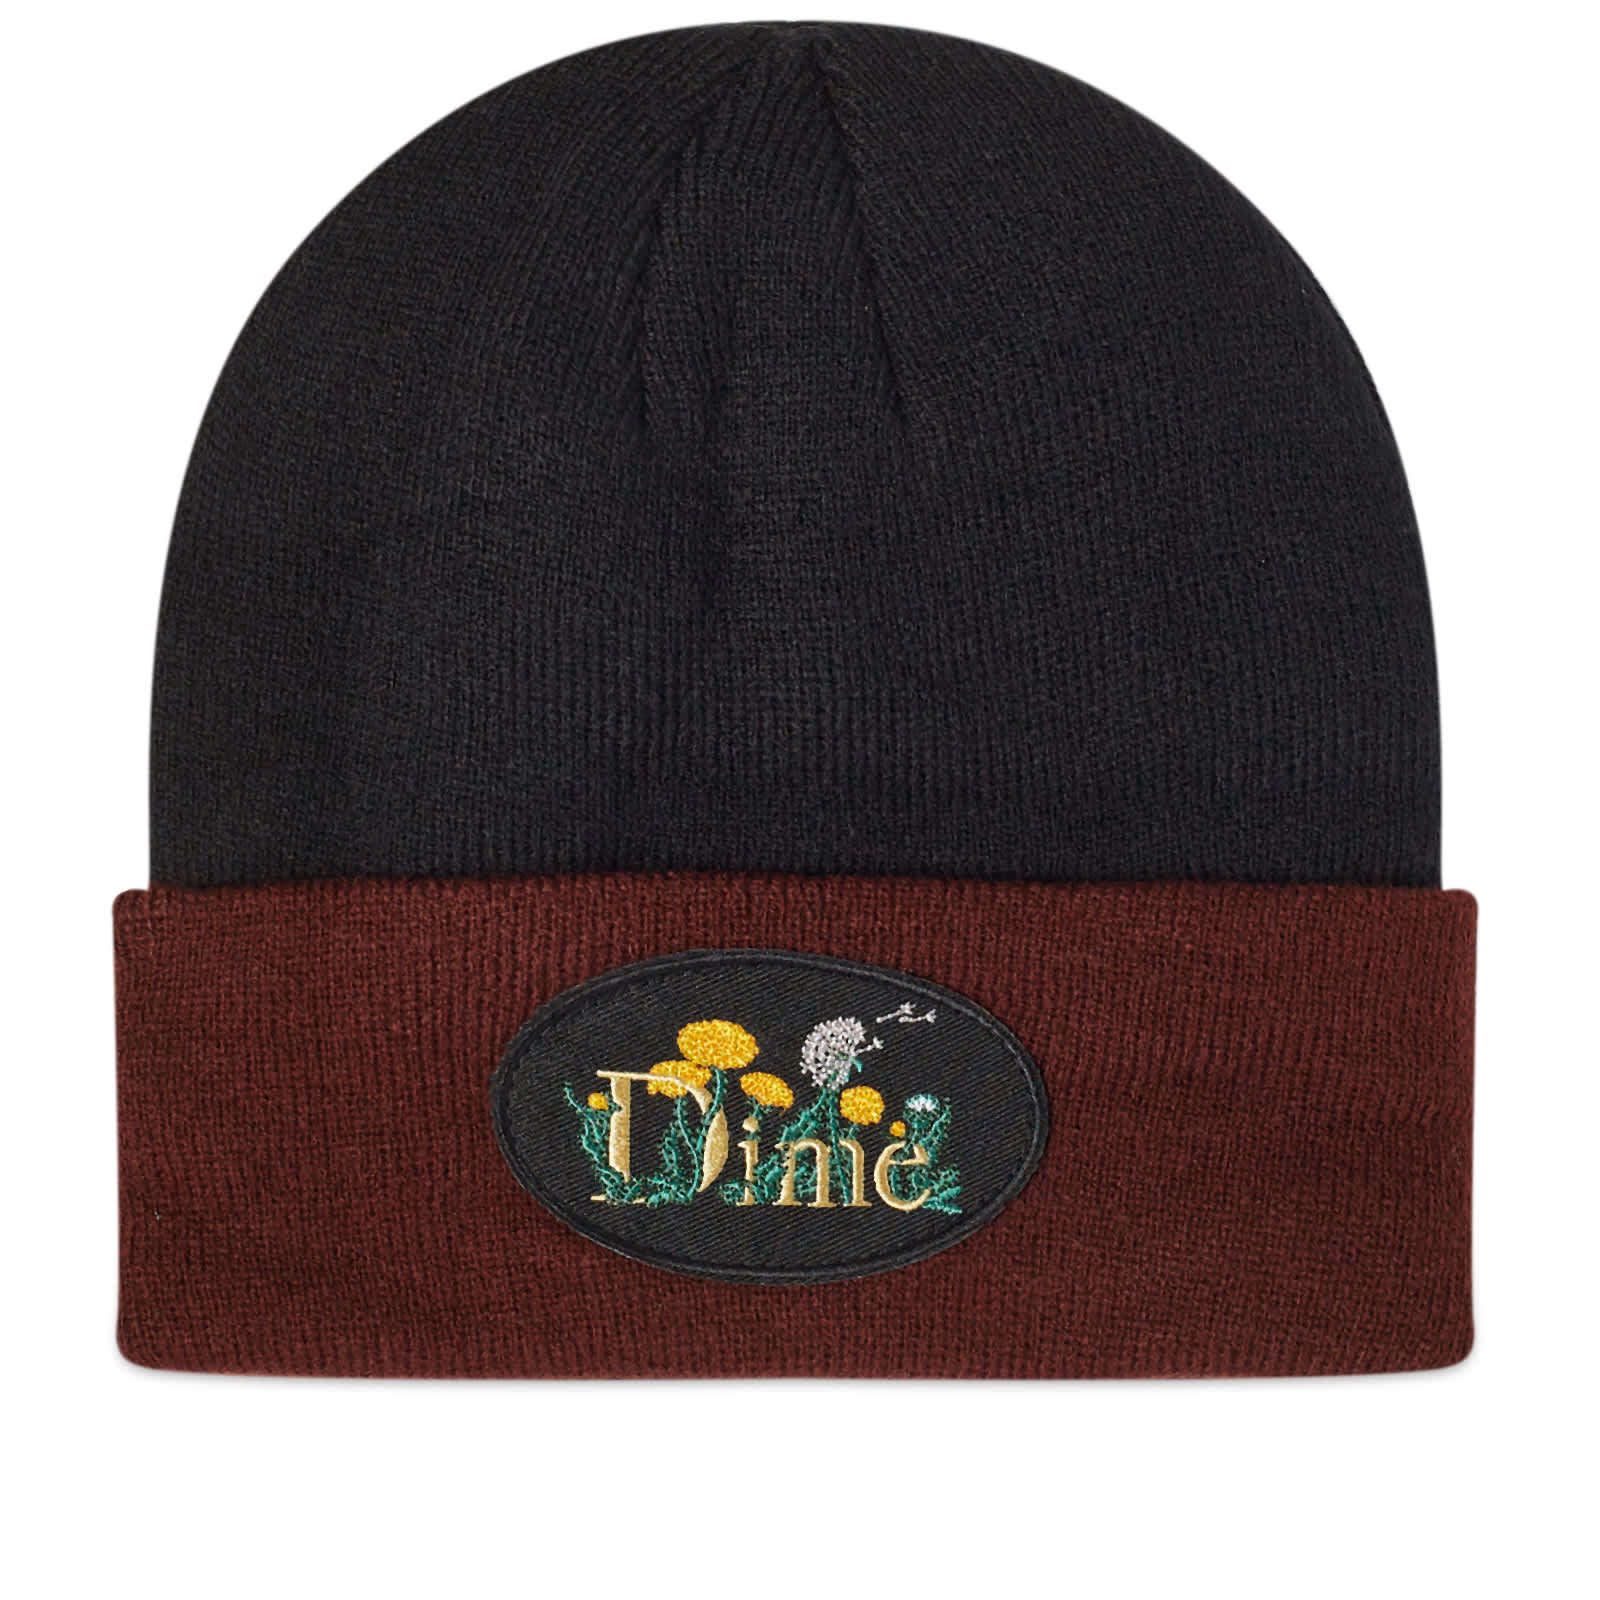 Шапка Dime Classic Allergie Fold, черный шапка dime dime classic logo warp розовый размер one size